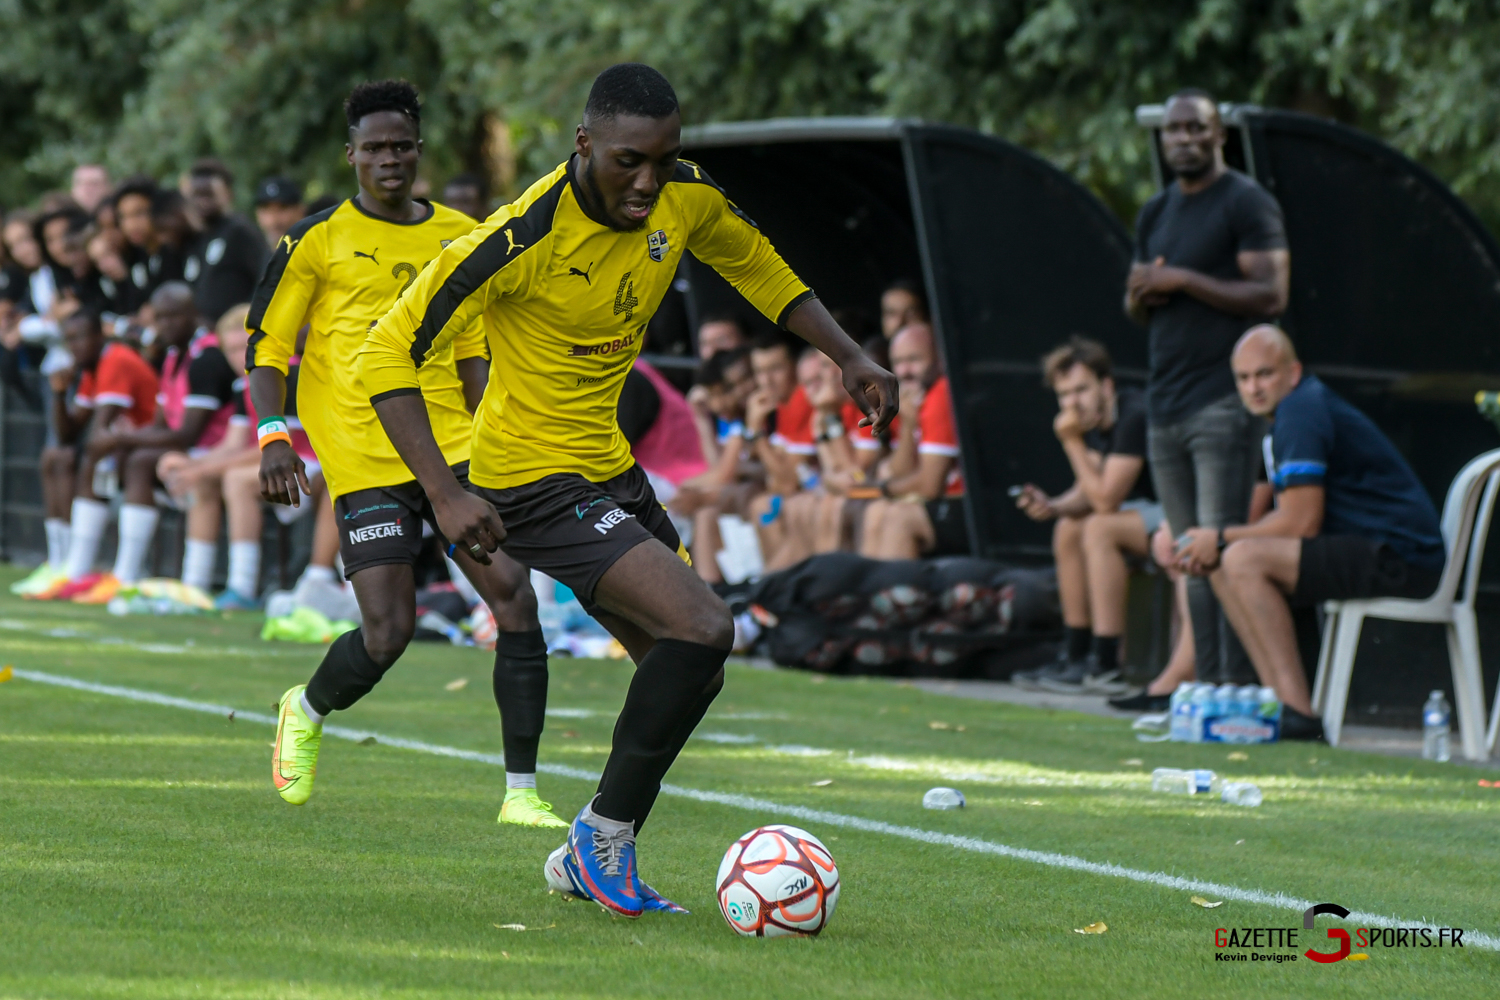 Football: Camon receives Portugal from Amiens in a friendly match